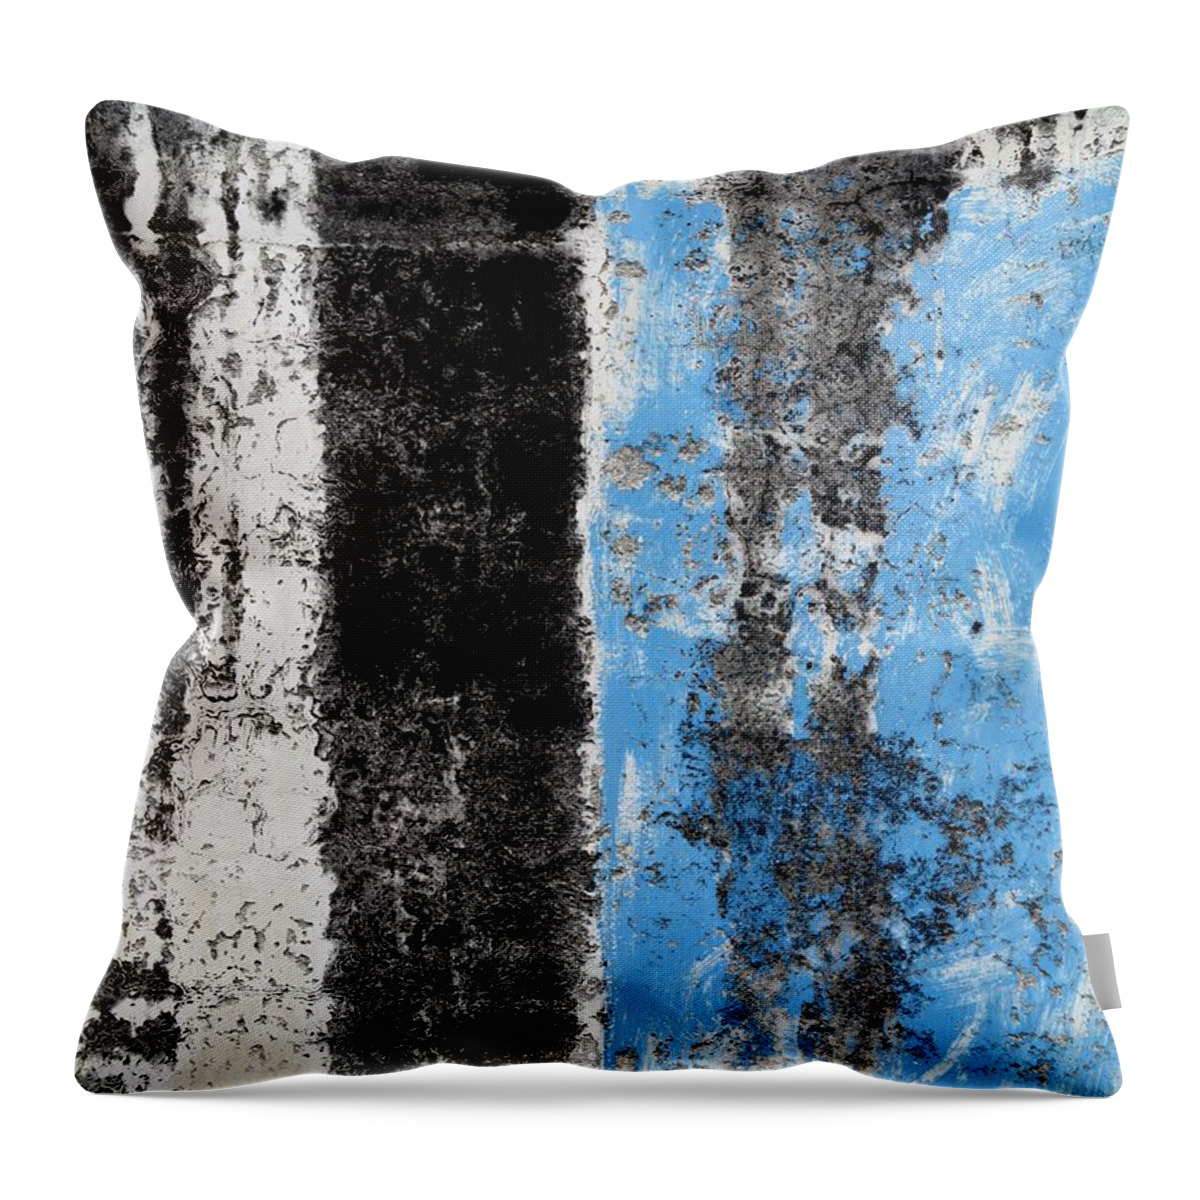 Texture Throw Pillow featuring the digital art Wall Abstract 34 by Maria Huntley